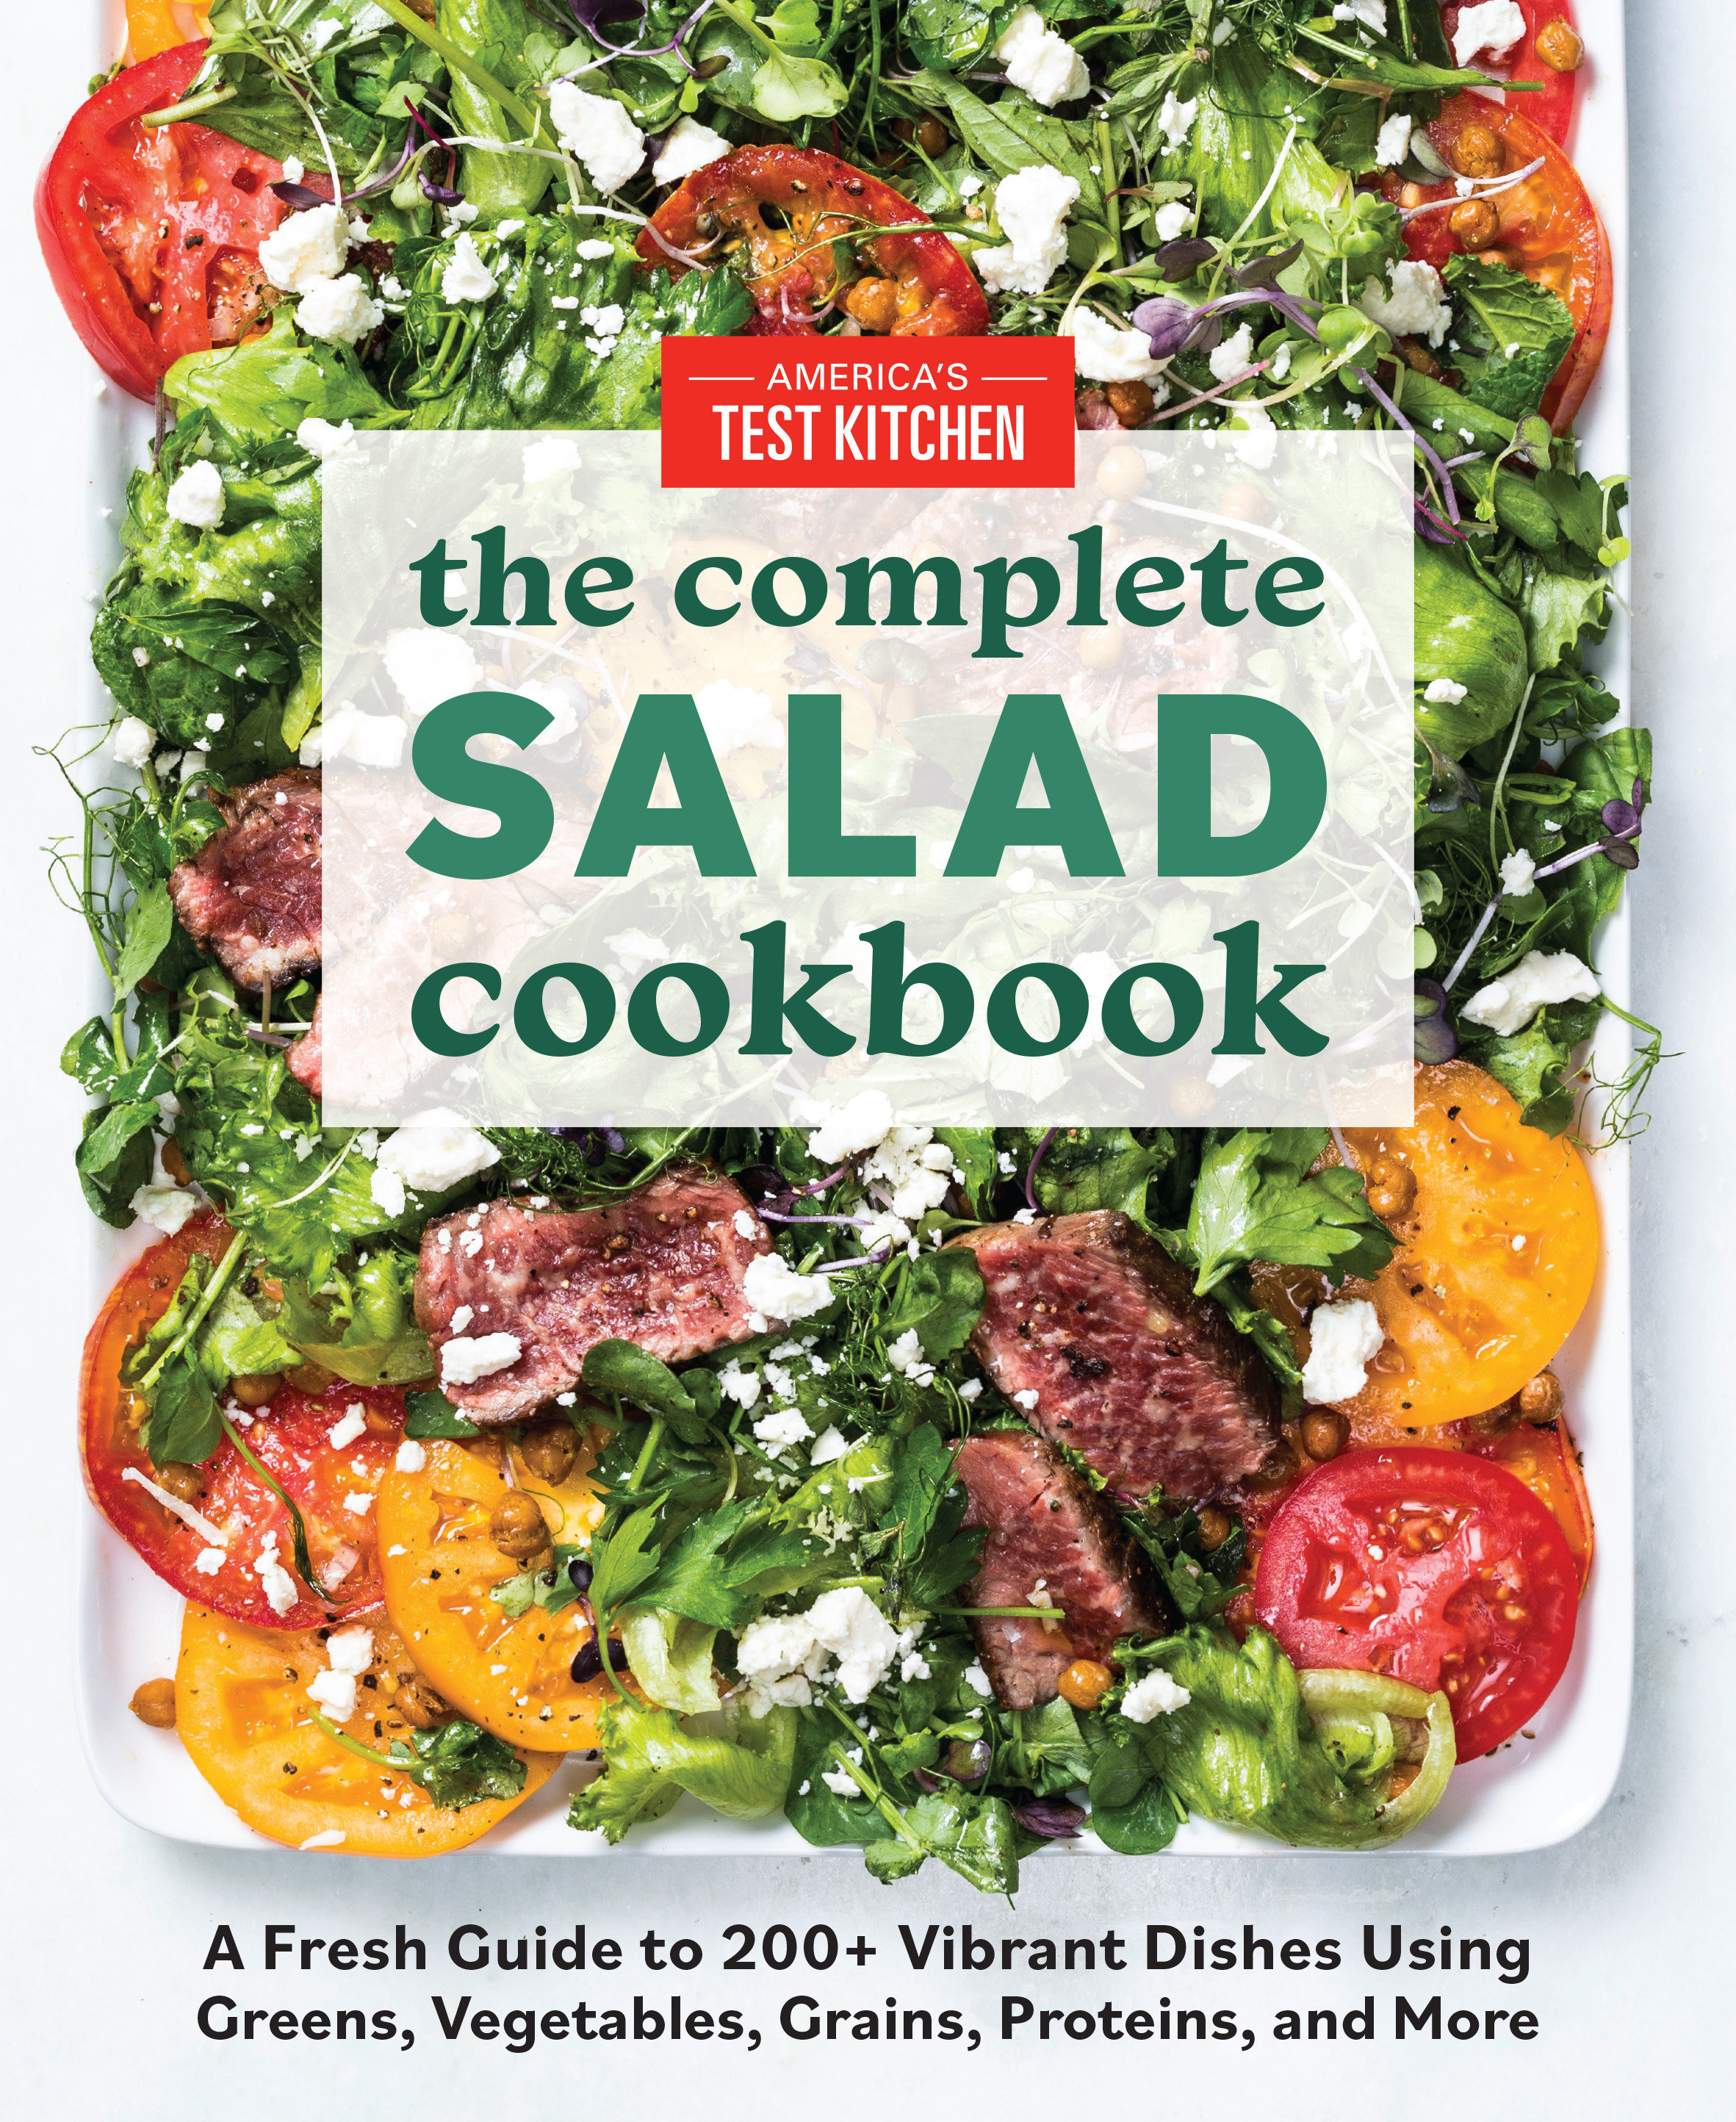 Umschlagbild für The Complete Salad Cookbook [electronic resource] : A Fresh Guide to 200+ Vibrant Dishes Using Greens, Vegetables, Grains, Proteins, and More